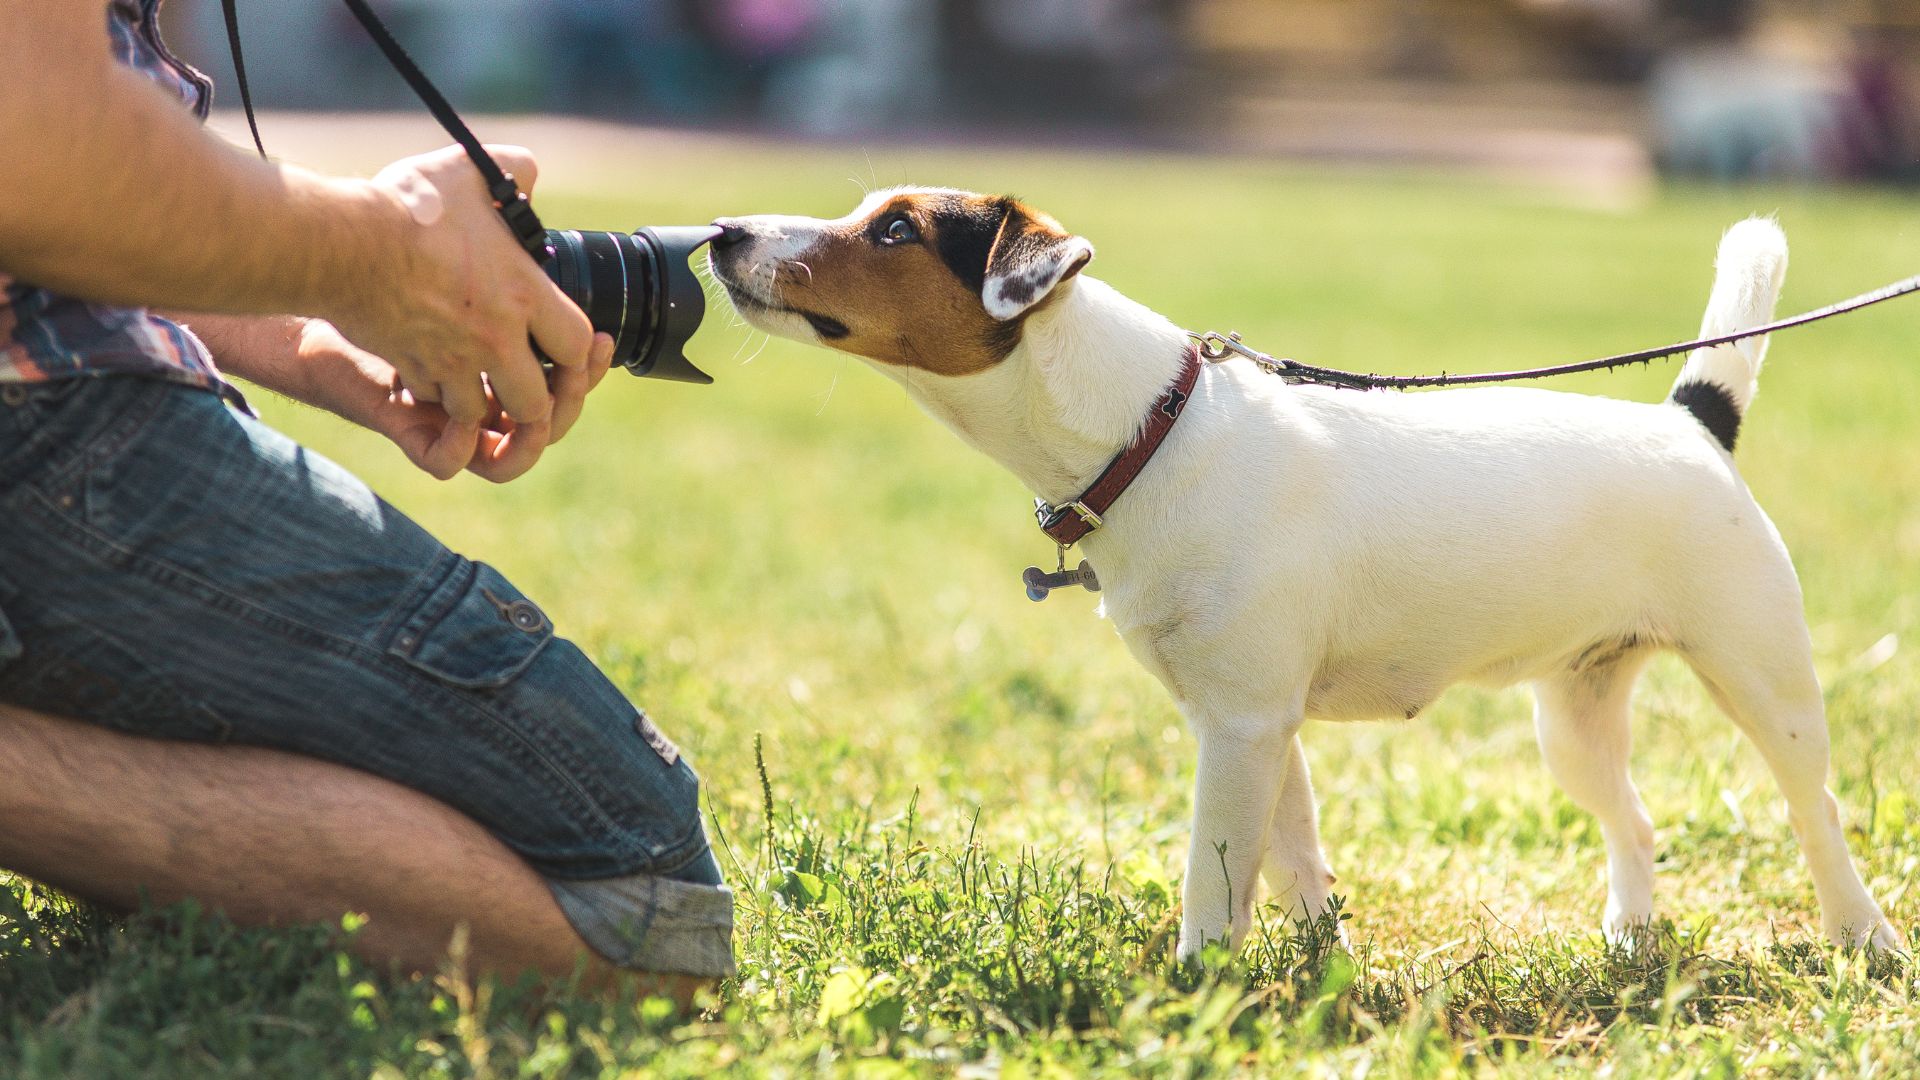 How to set up a pet photography business for success in spring: A pet photographer kneeling in a green field. A jack russel dog is standing in front of them sniffina the lens of the camera.